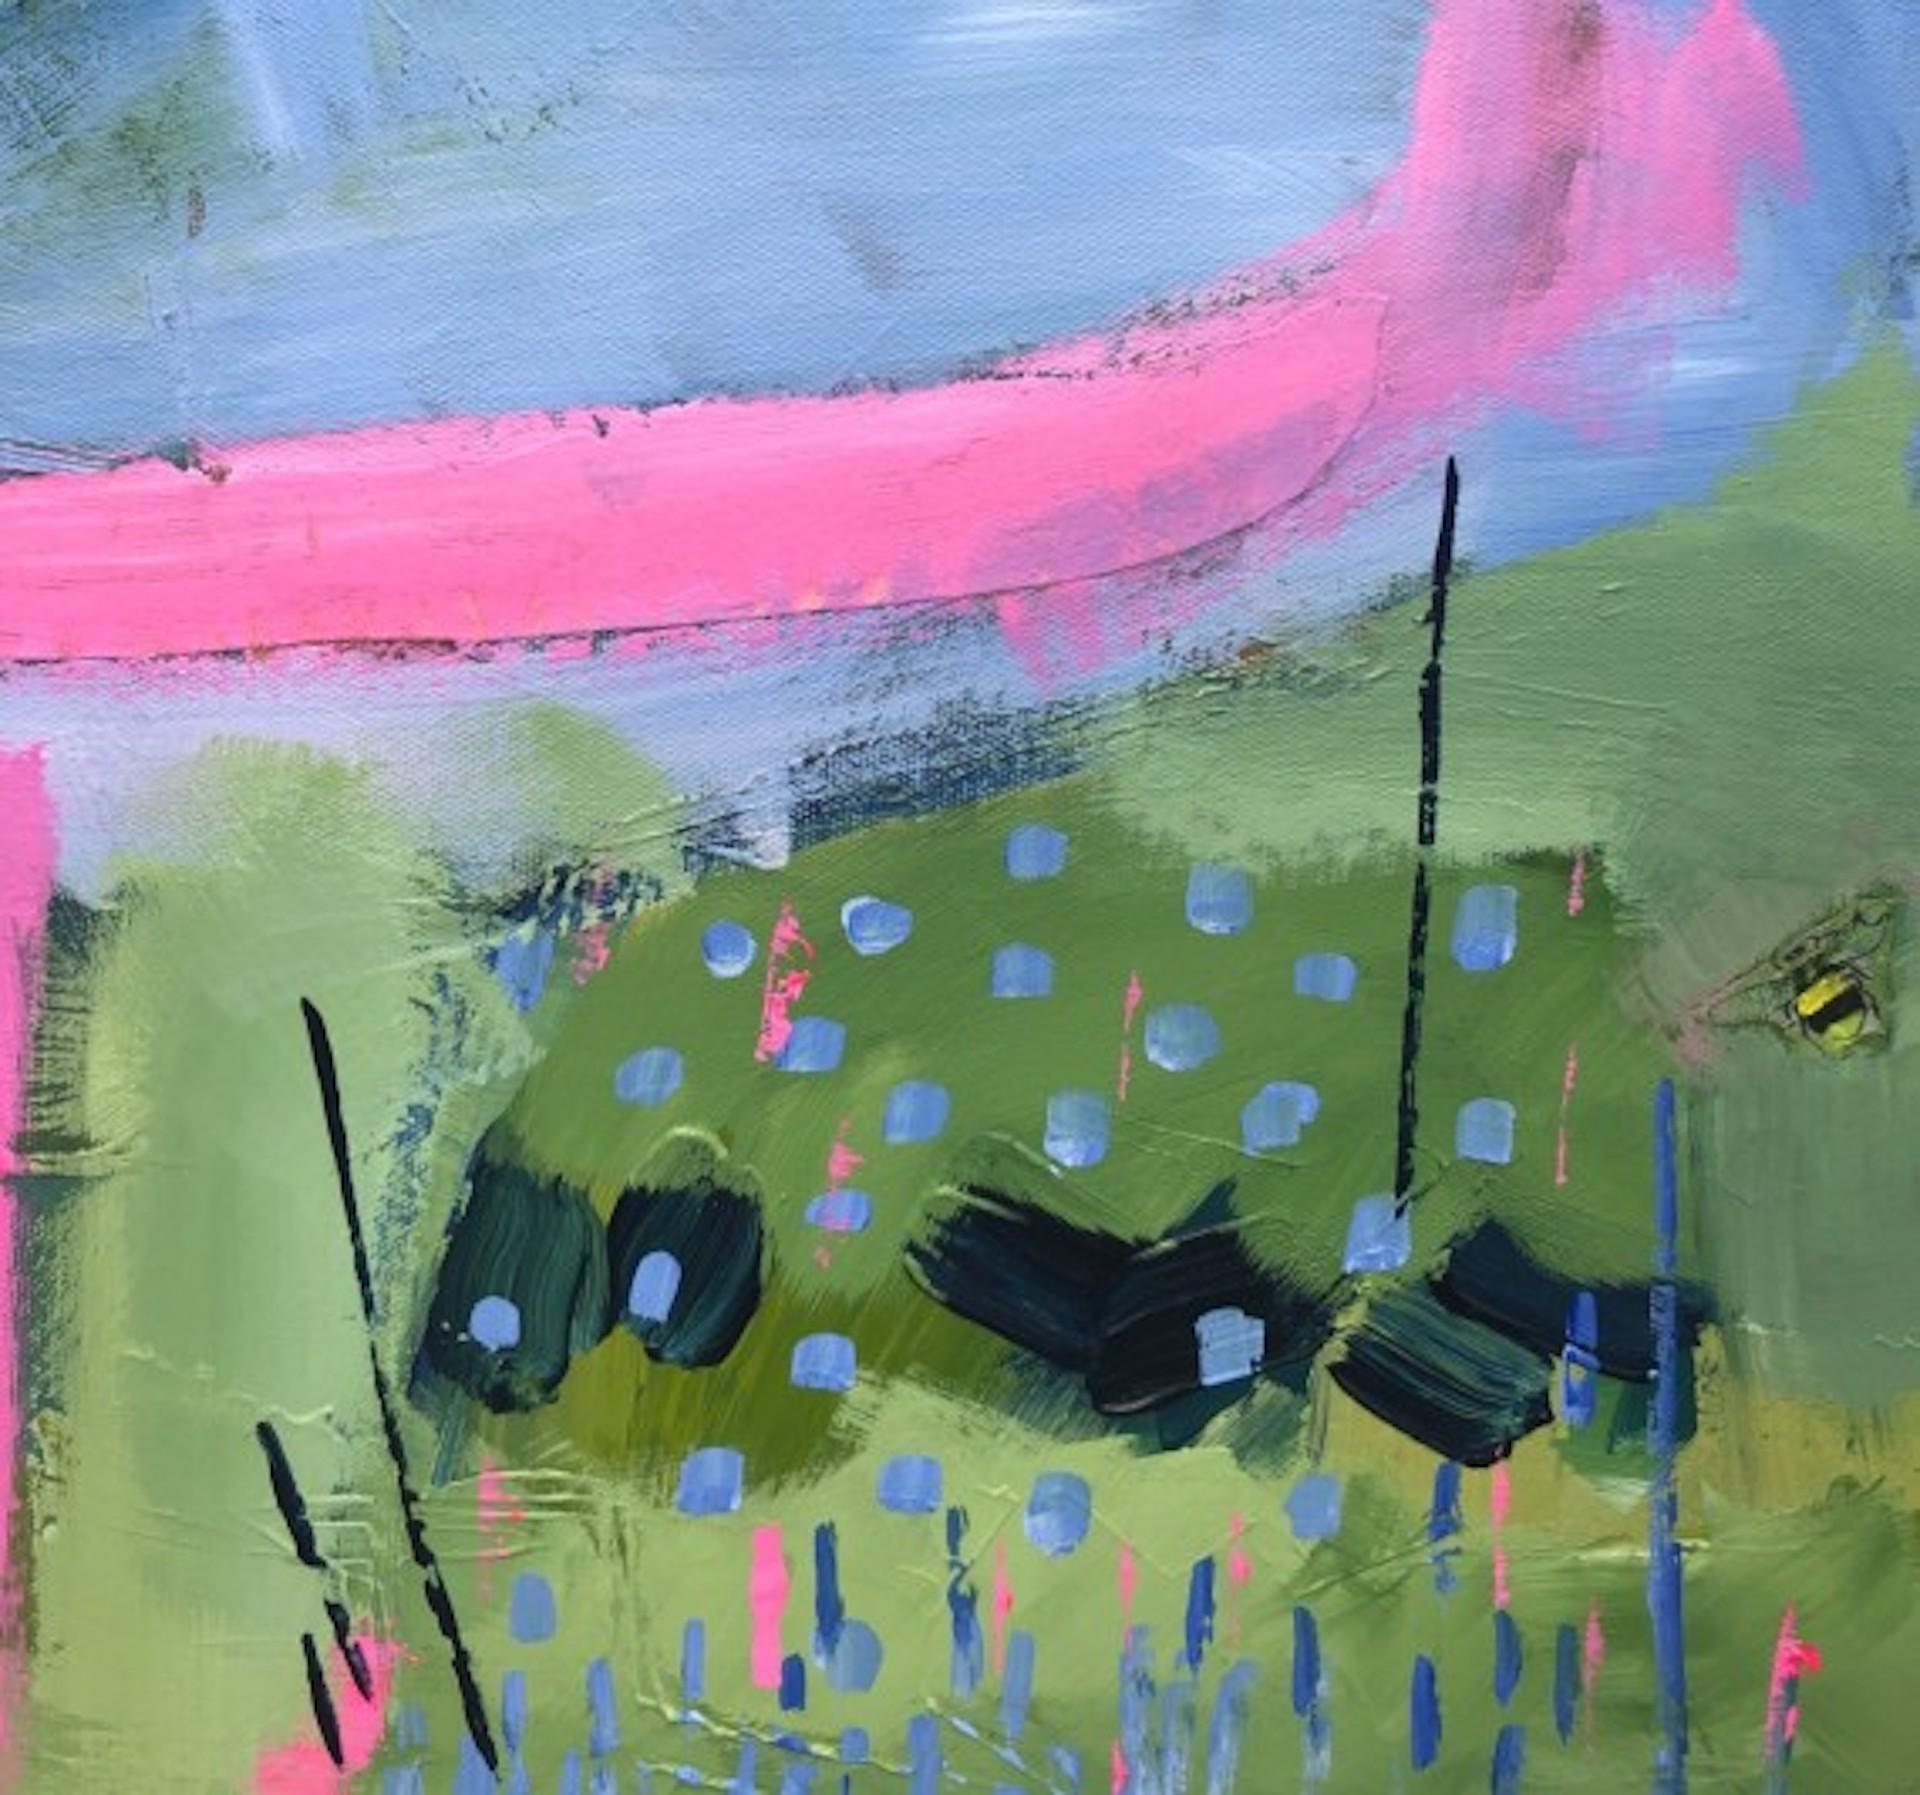 Maggie LaPorte Banks. Summertime in Devon [2021]

original
Acrylic on canvas, collage and spray paint.
Image size: H:75 cm x W:101 cm
Complete Size of Unframed Work: H:75 cm x W:101 cm x D:1.5cm
Sold Unframed
Please note that insitu images are